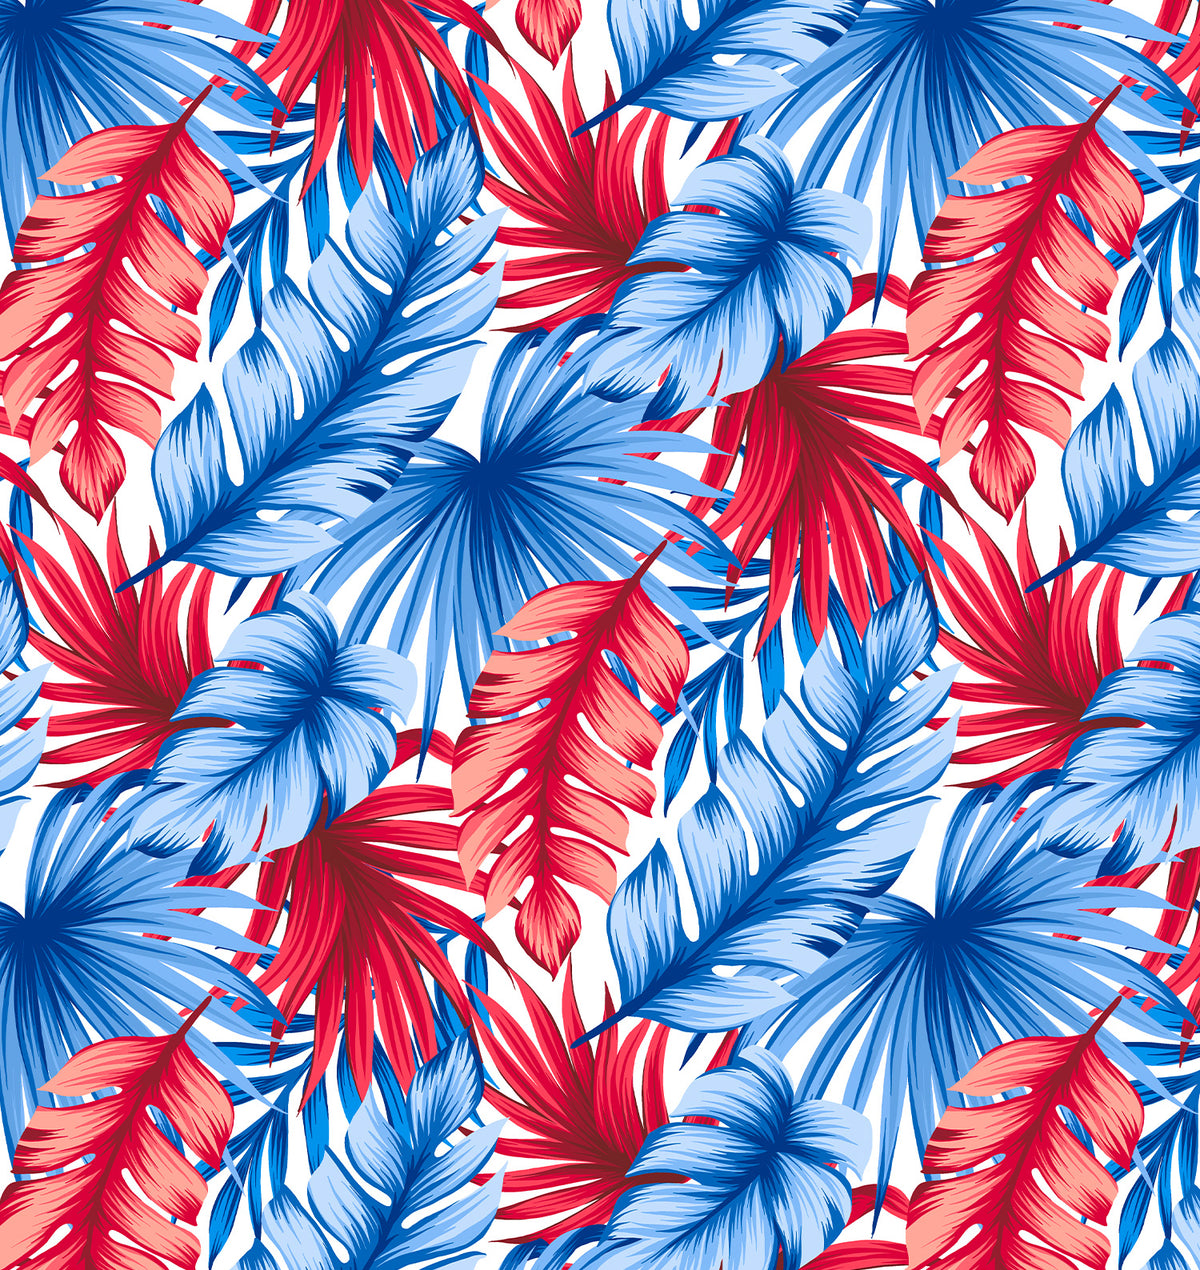 American Dream swimsuit print with red, white, and blue palm leaves